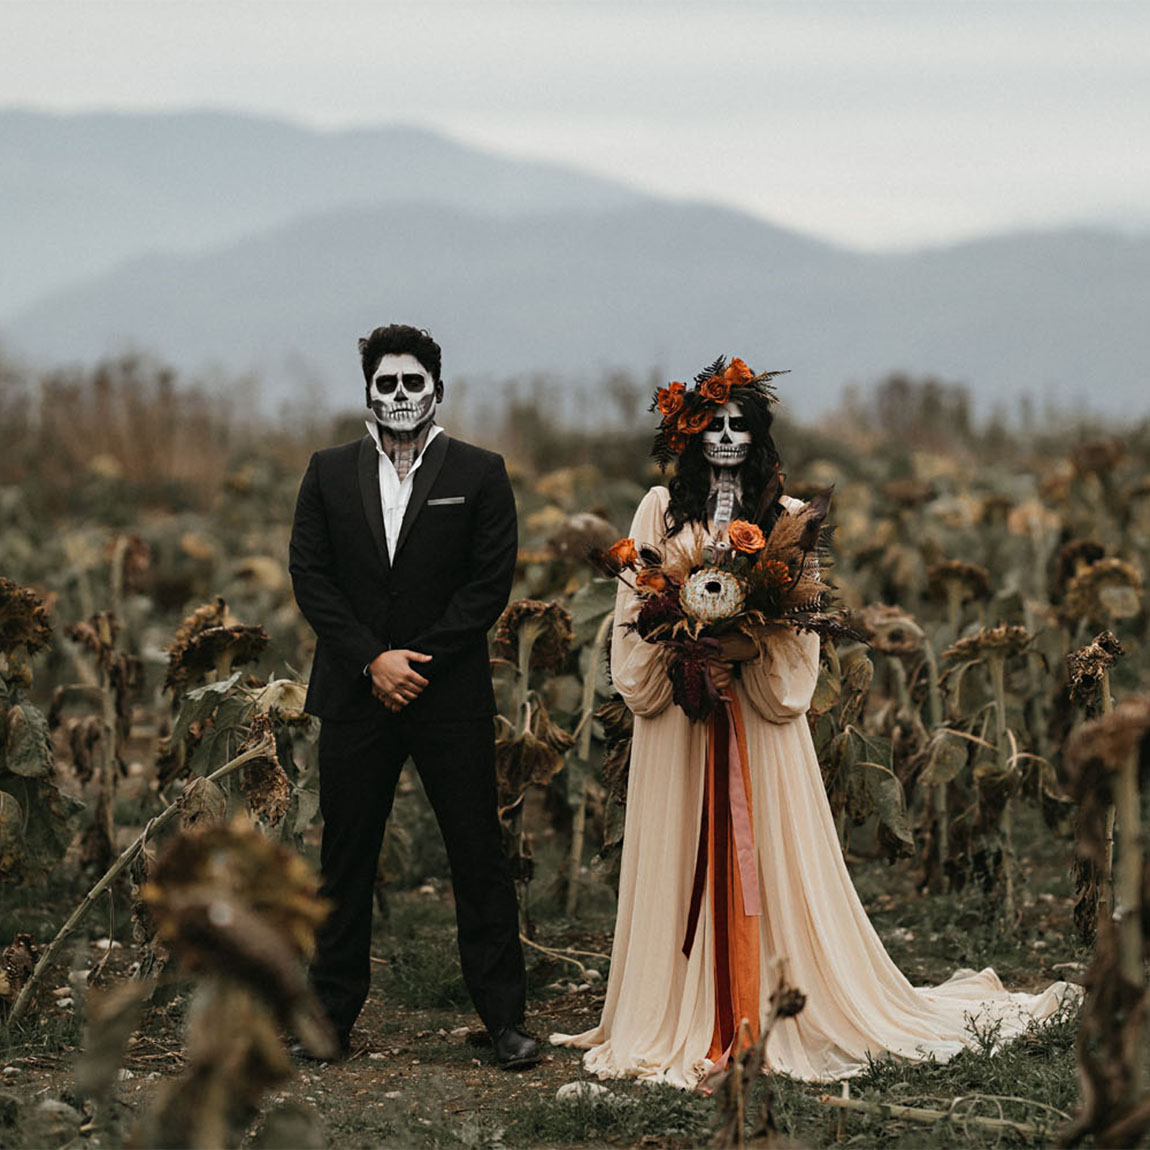 Creepy Chic Halloween Fun Before This Couple Says 'I Do' IRL!